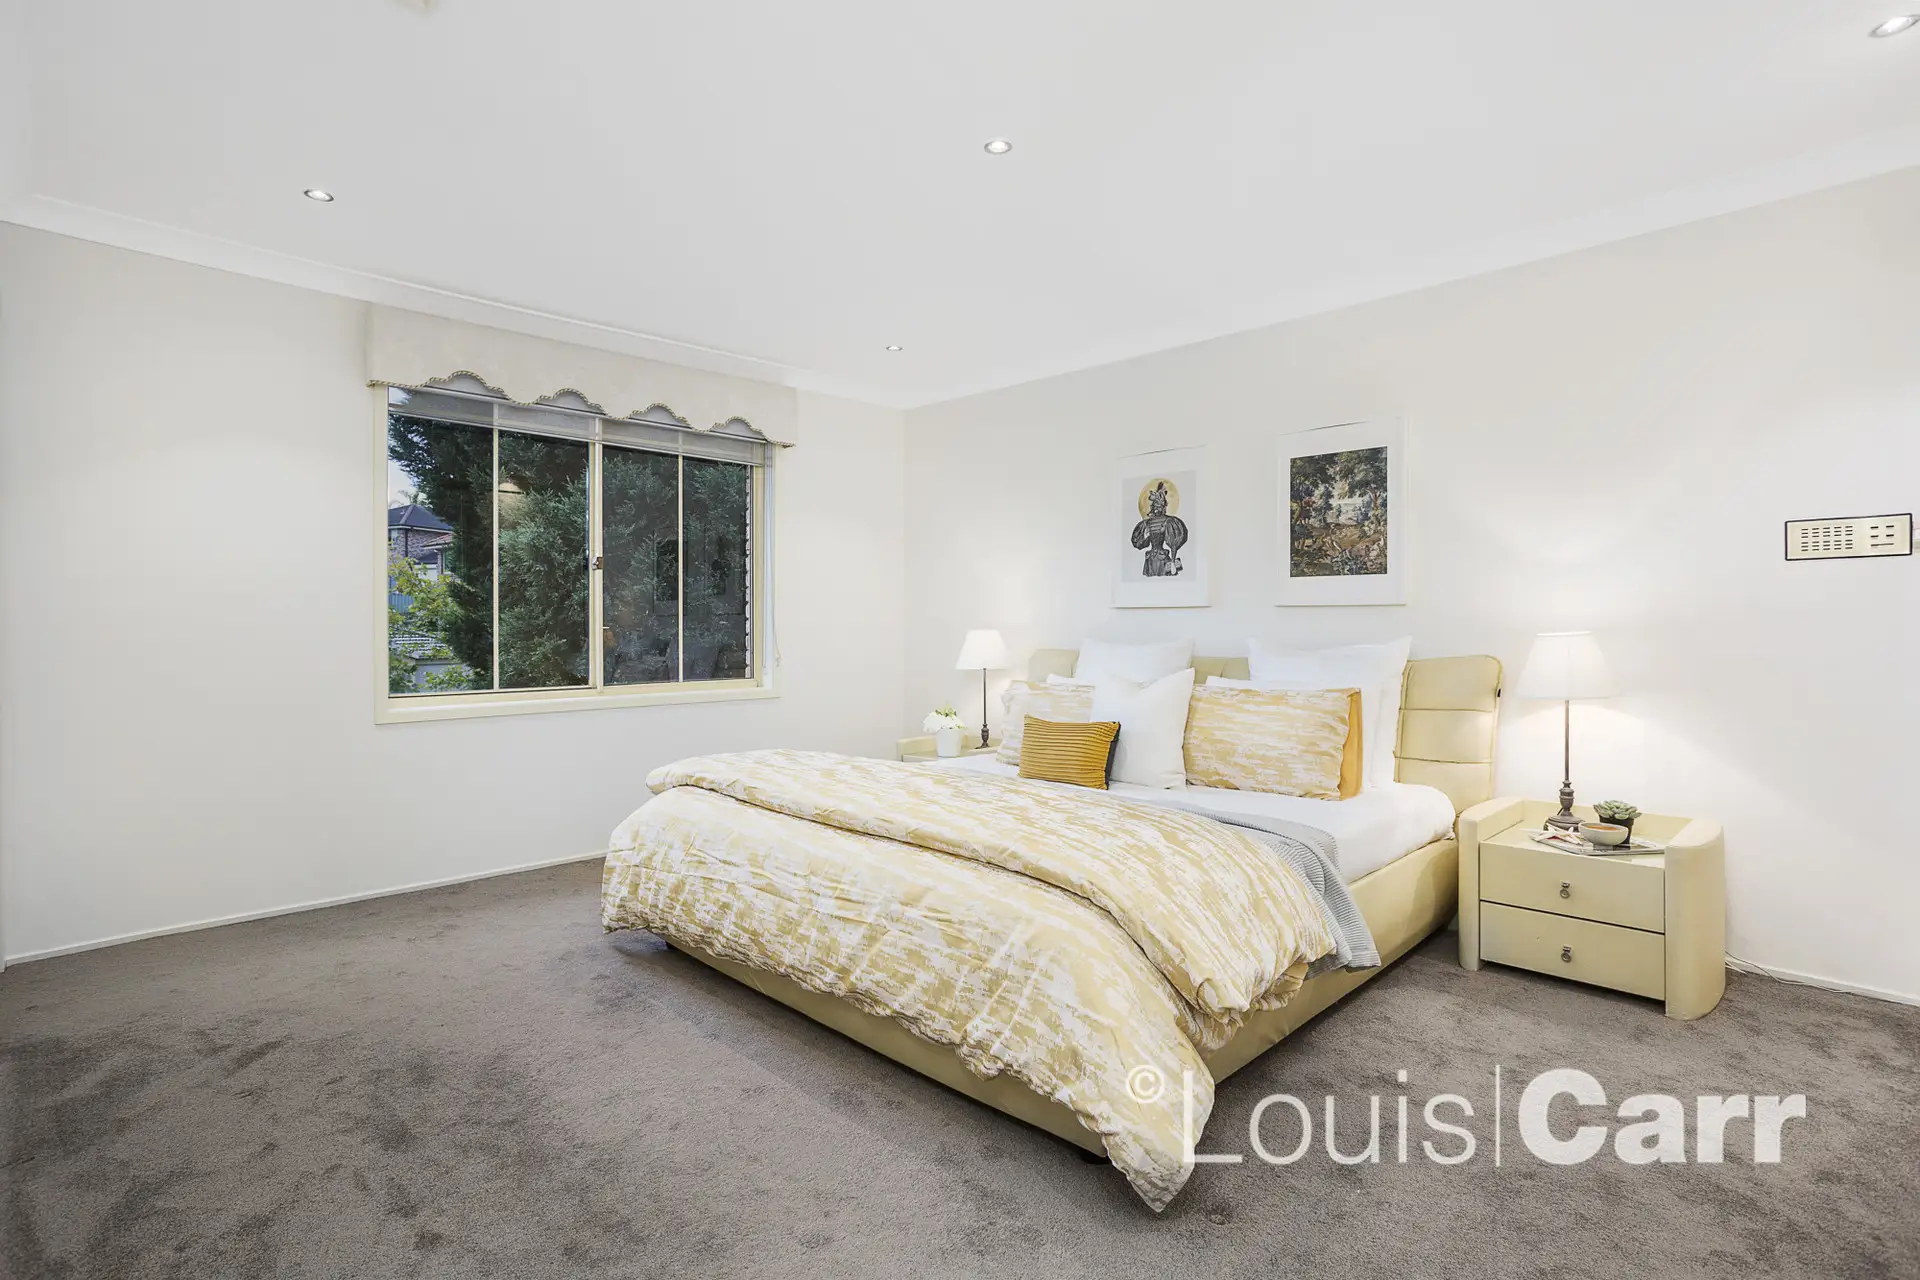 Photo #7: 32 The Glade, West Pennant Hills - Sold by Louis Carr Real Estate